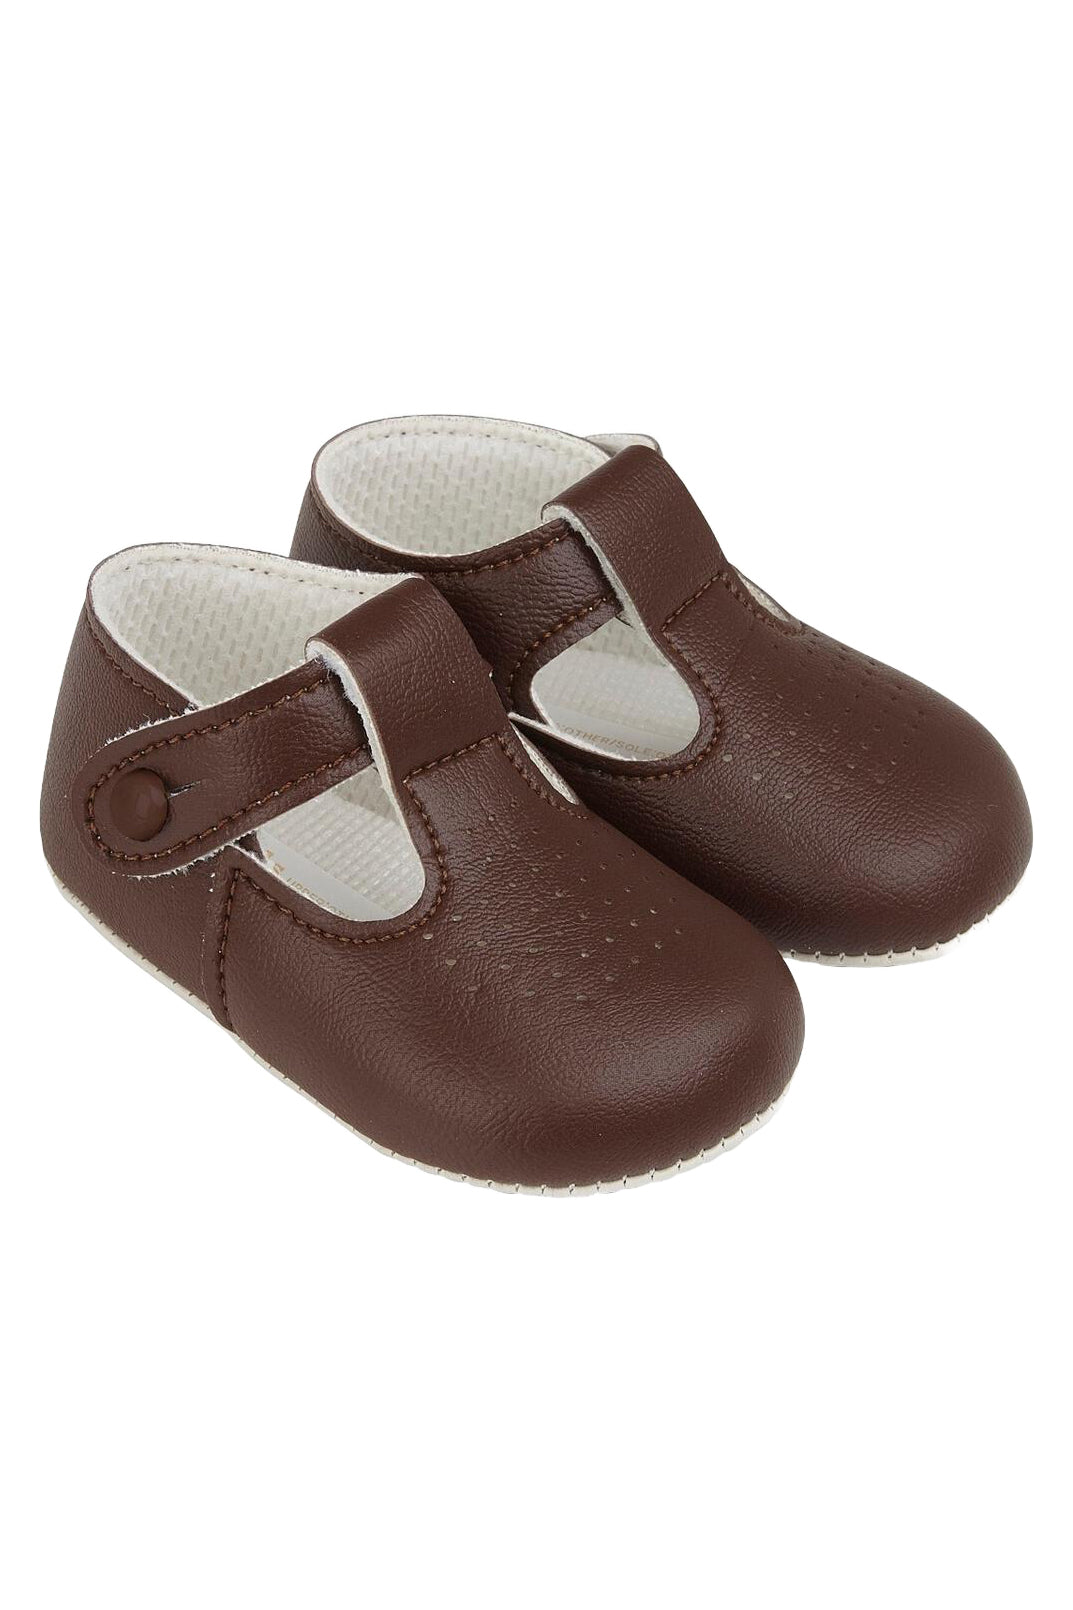 Baypods Brown T-Bar Soft Sole Shoes | Millie and John